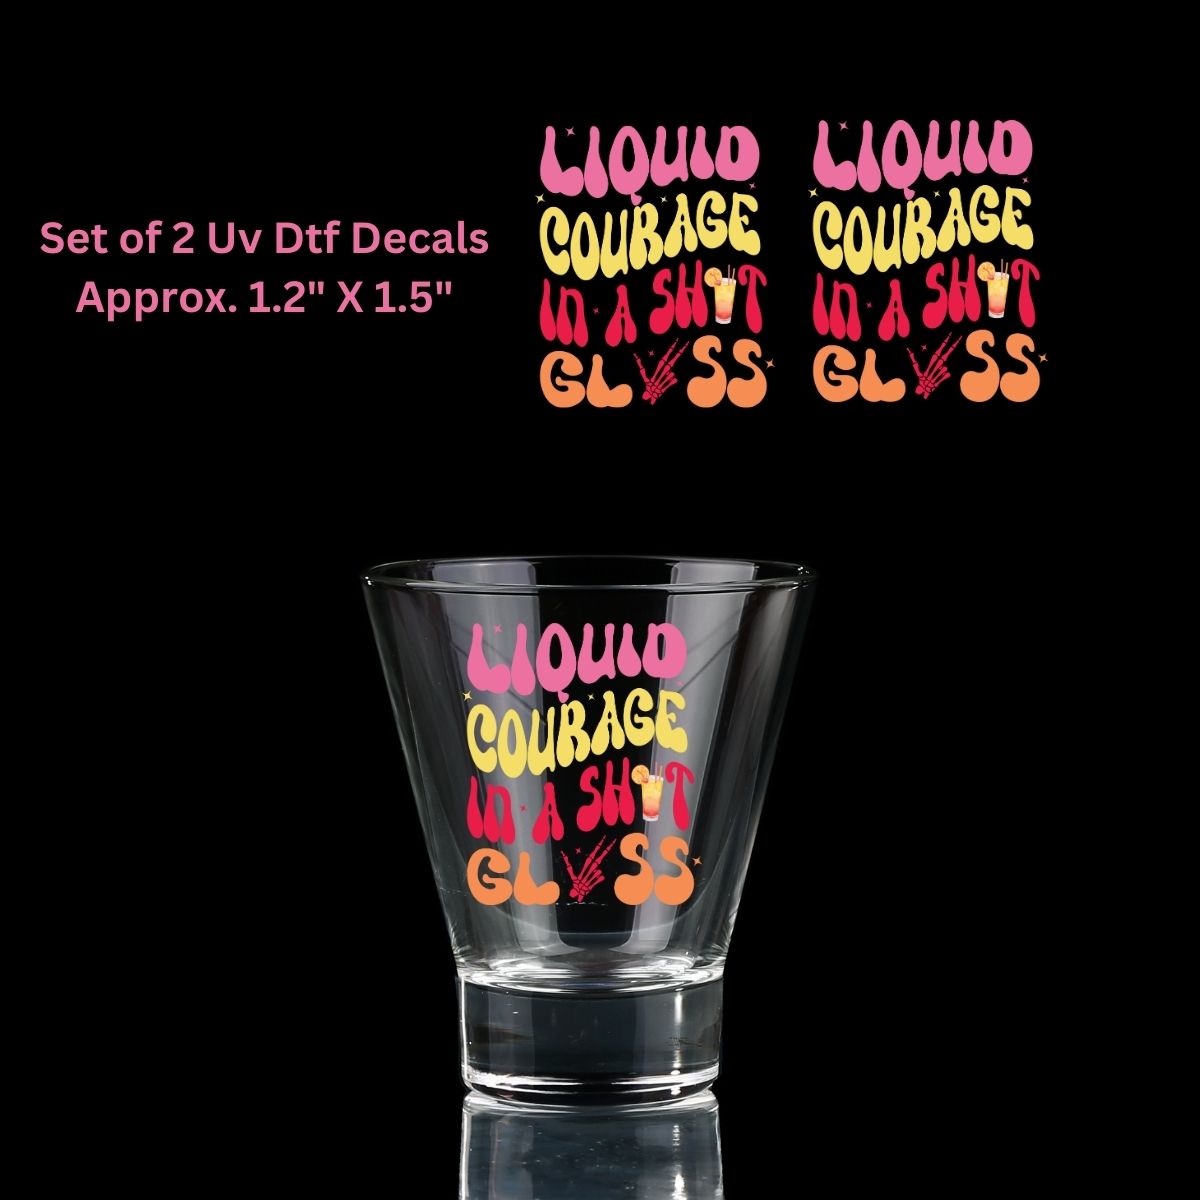 Set of 2 Uv Dtf Shot Glass Decals ~ Liquid Courage In A Shot Glass